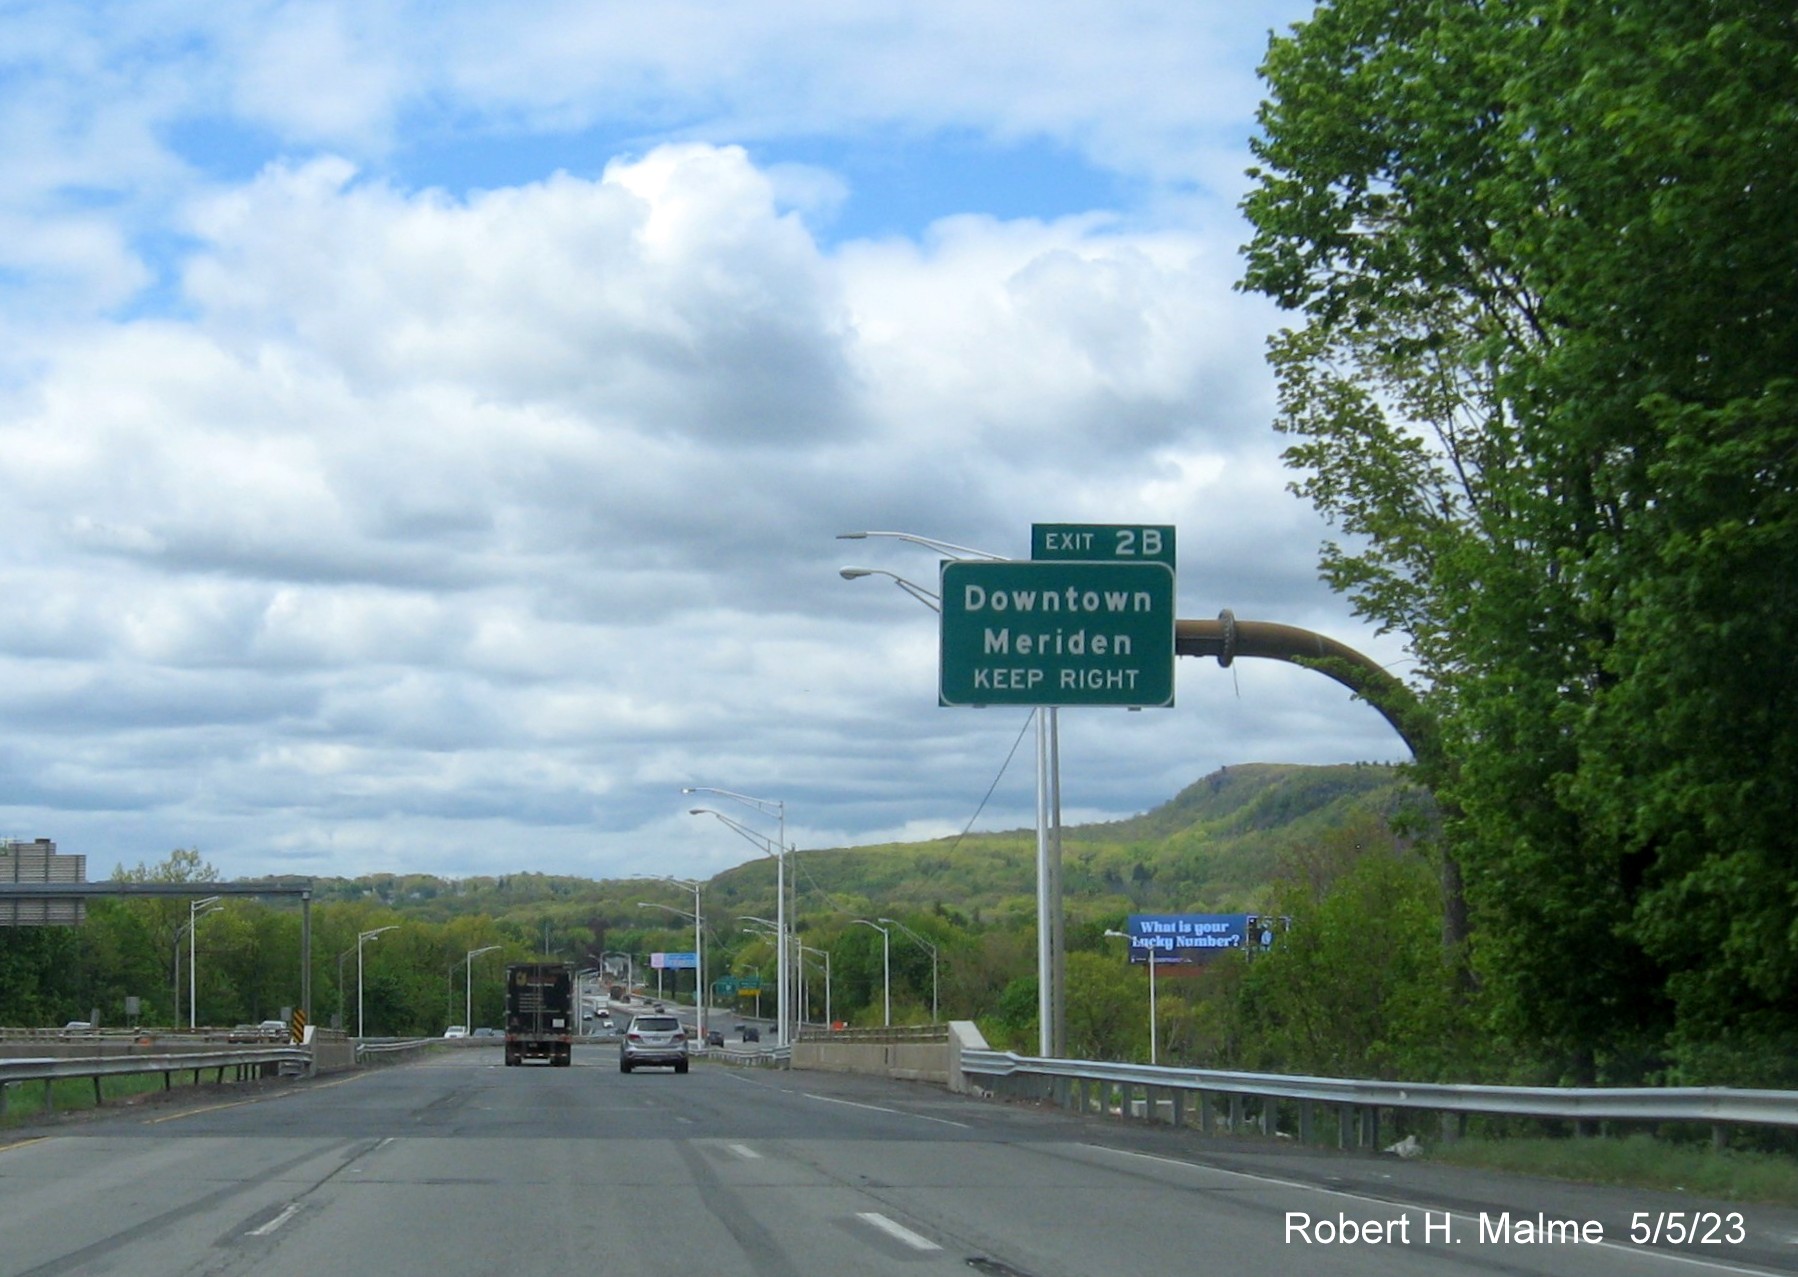 Image of overhead ramp sign for Downtown Meriden exit with new milepost based exit number on I-691 West in Meriden CT, May 2023